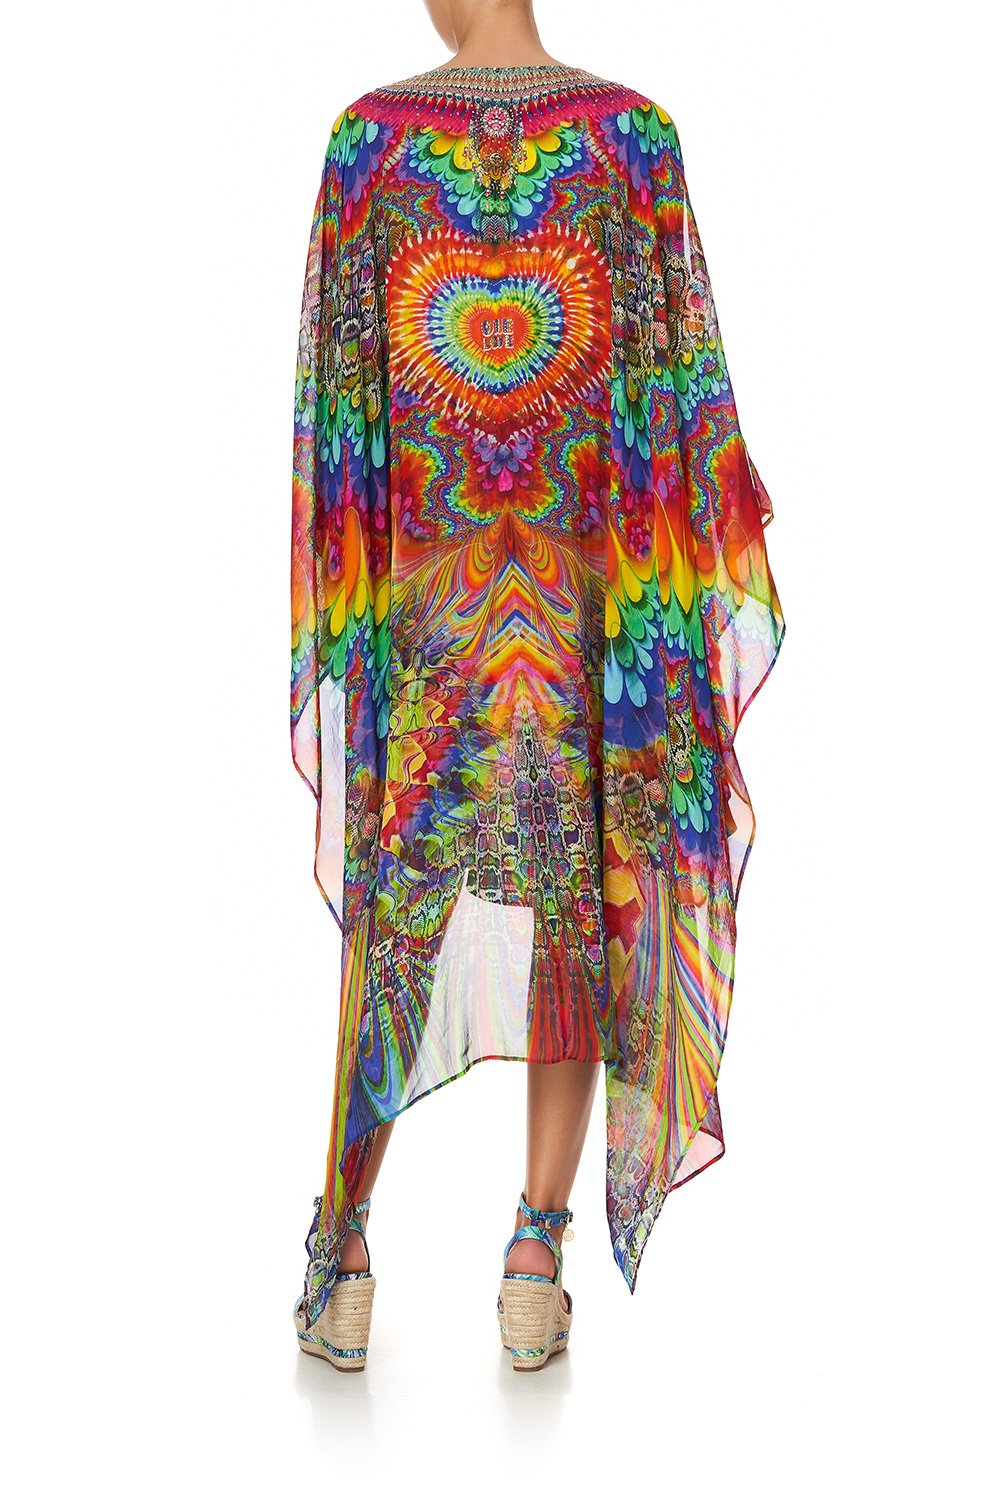 LONG SHEER OVERLAY DRESS COMING DOWN FROM COSMOS